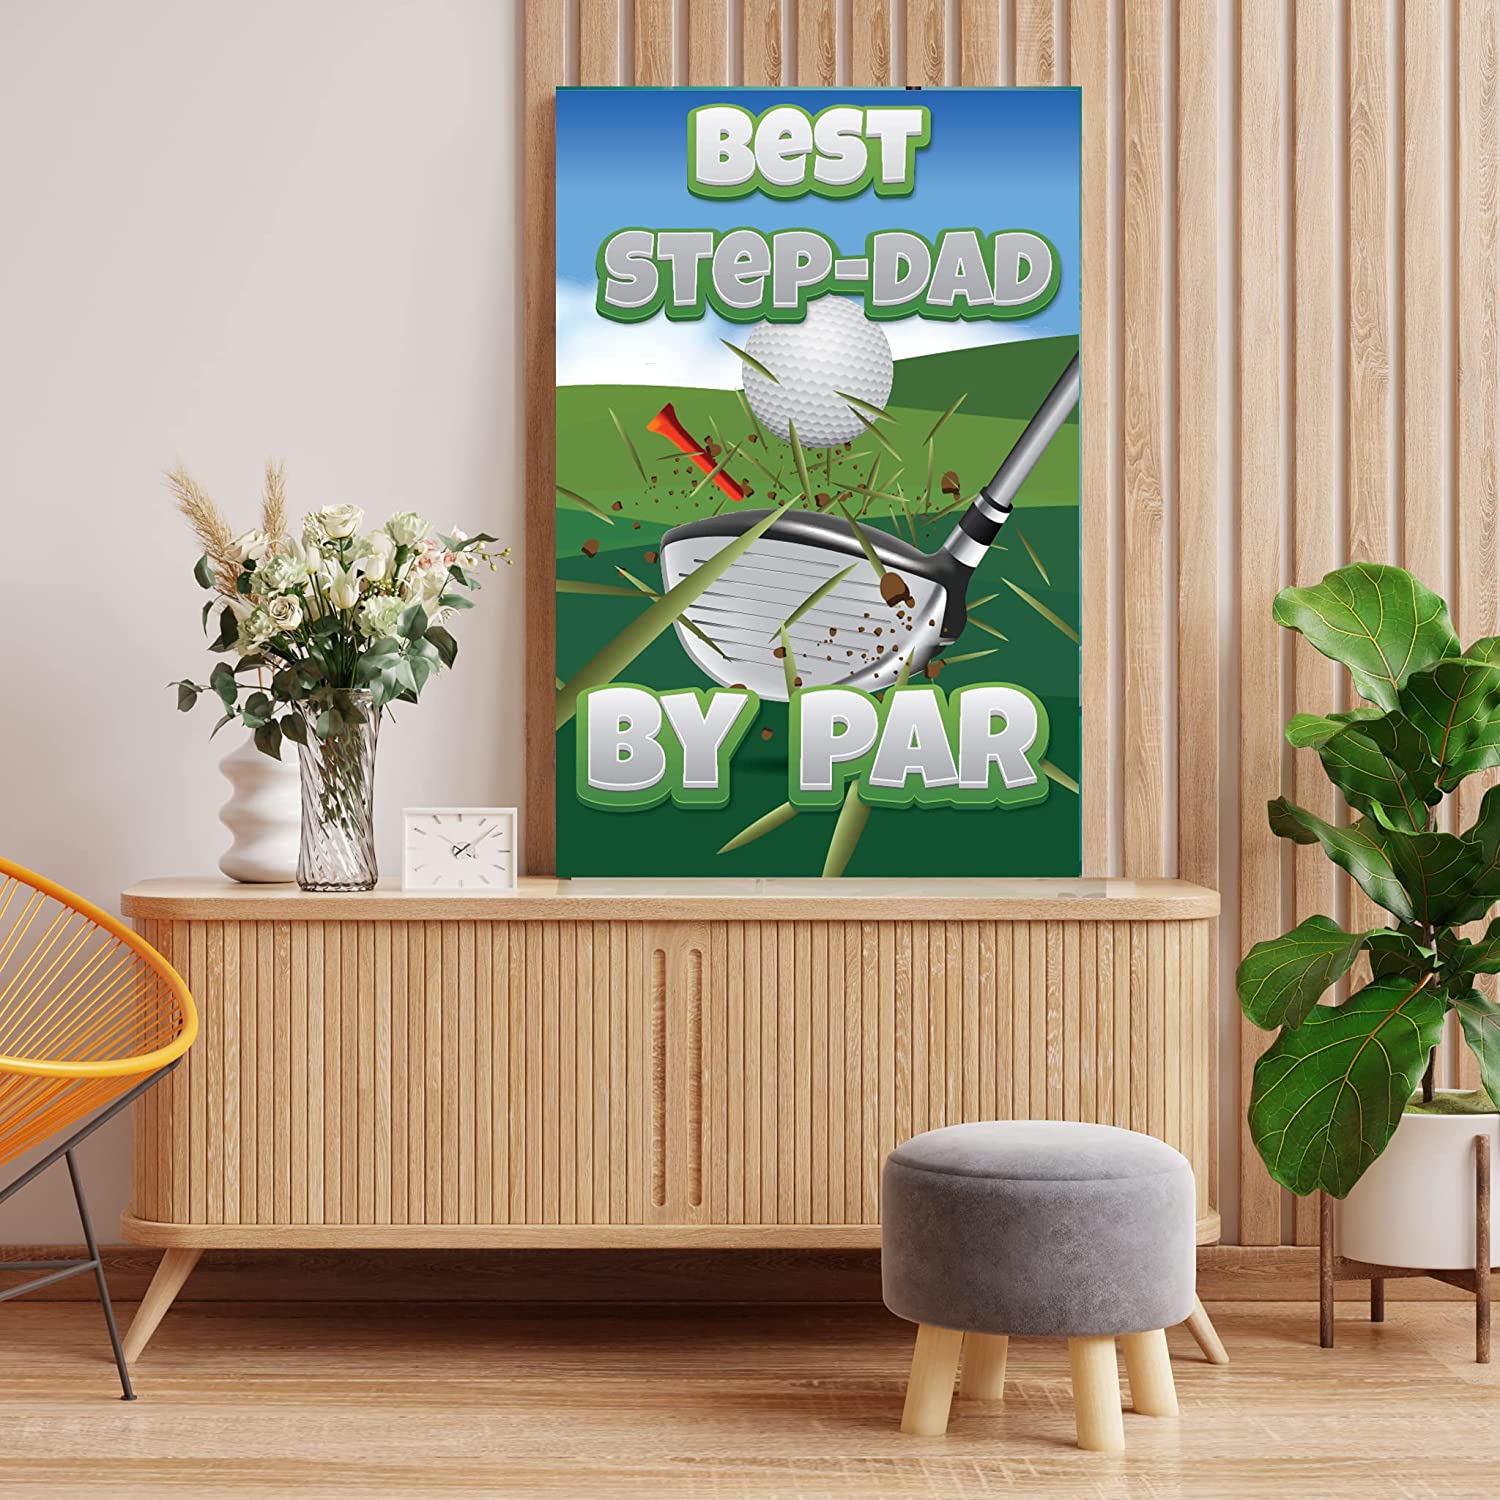 3' Jumbo Best Step-Dad By Par Step-Father's Day Card